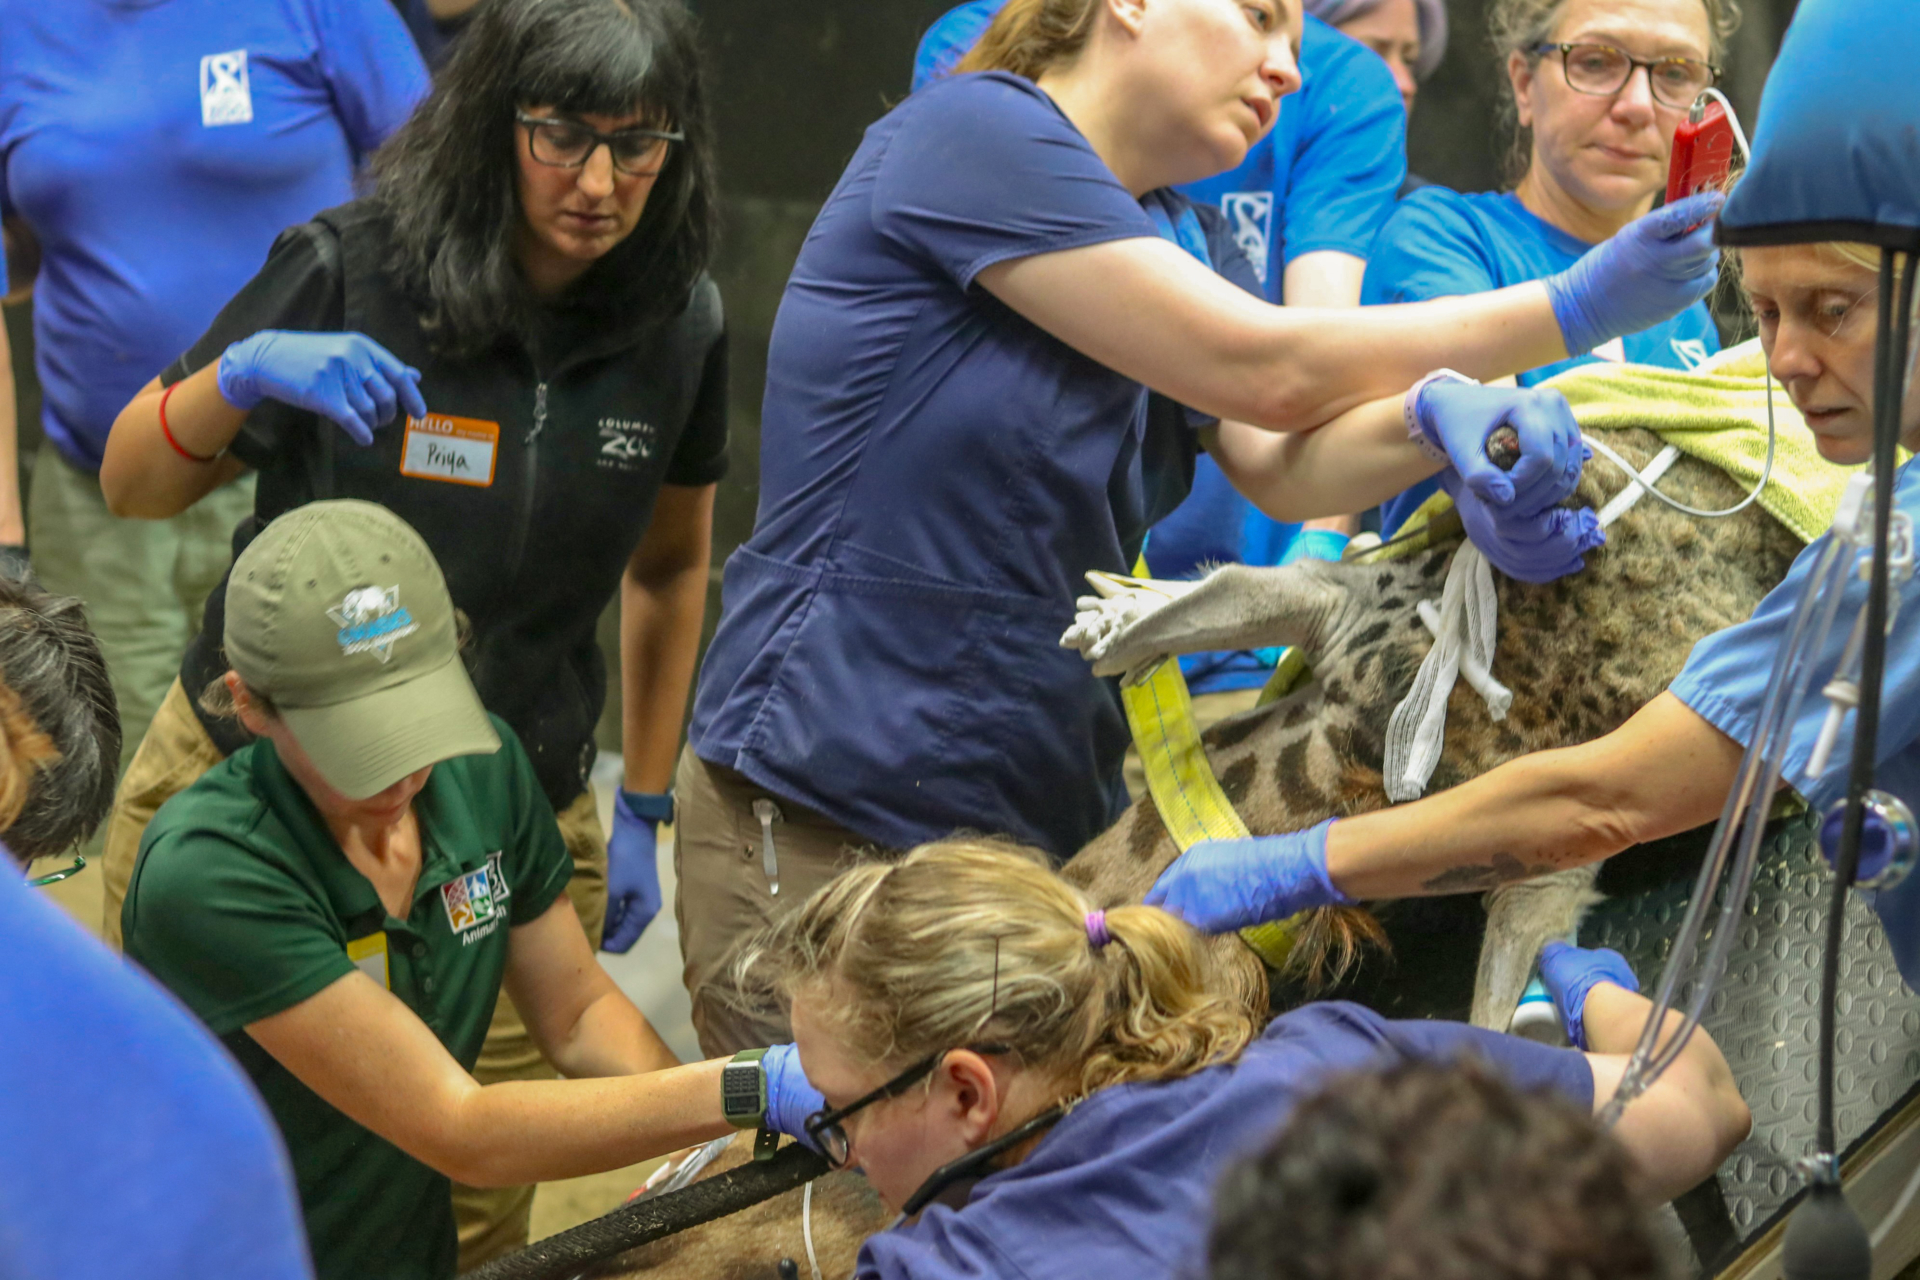 Veterinarian team observing and working on shaving giraffe Jaffa's hoof while other vet support staff monitor his vitals.